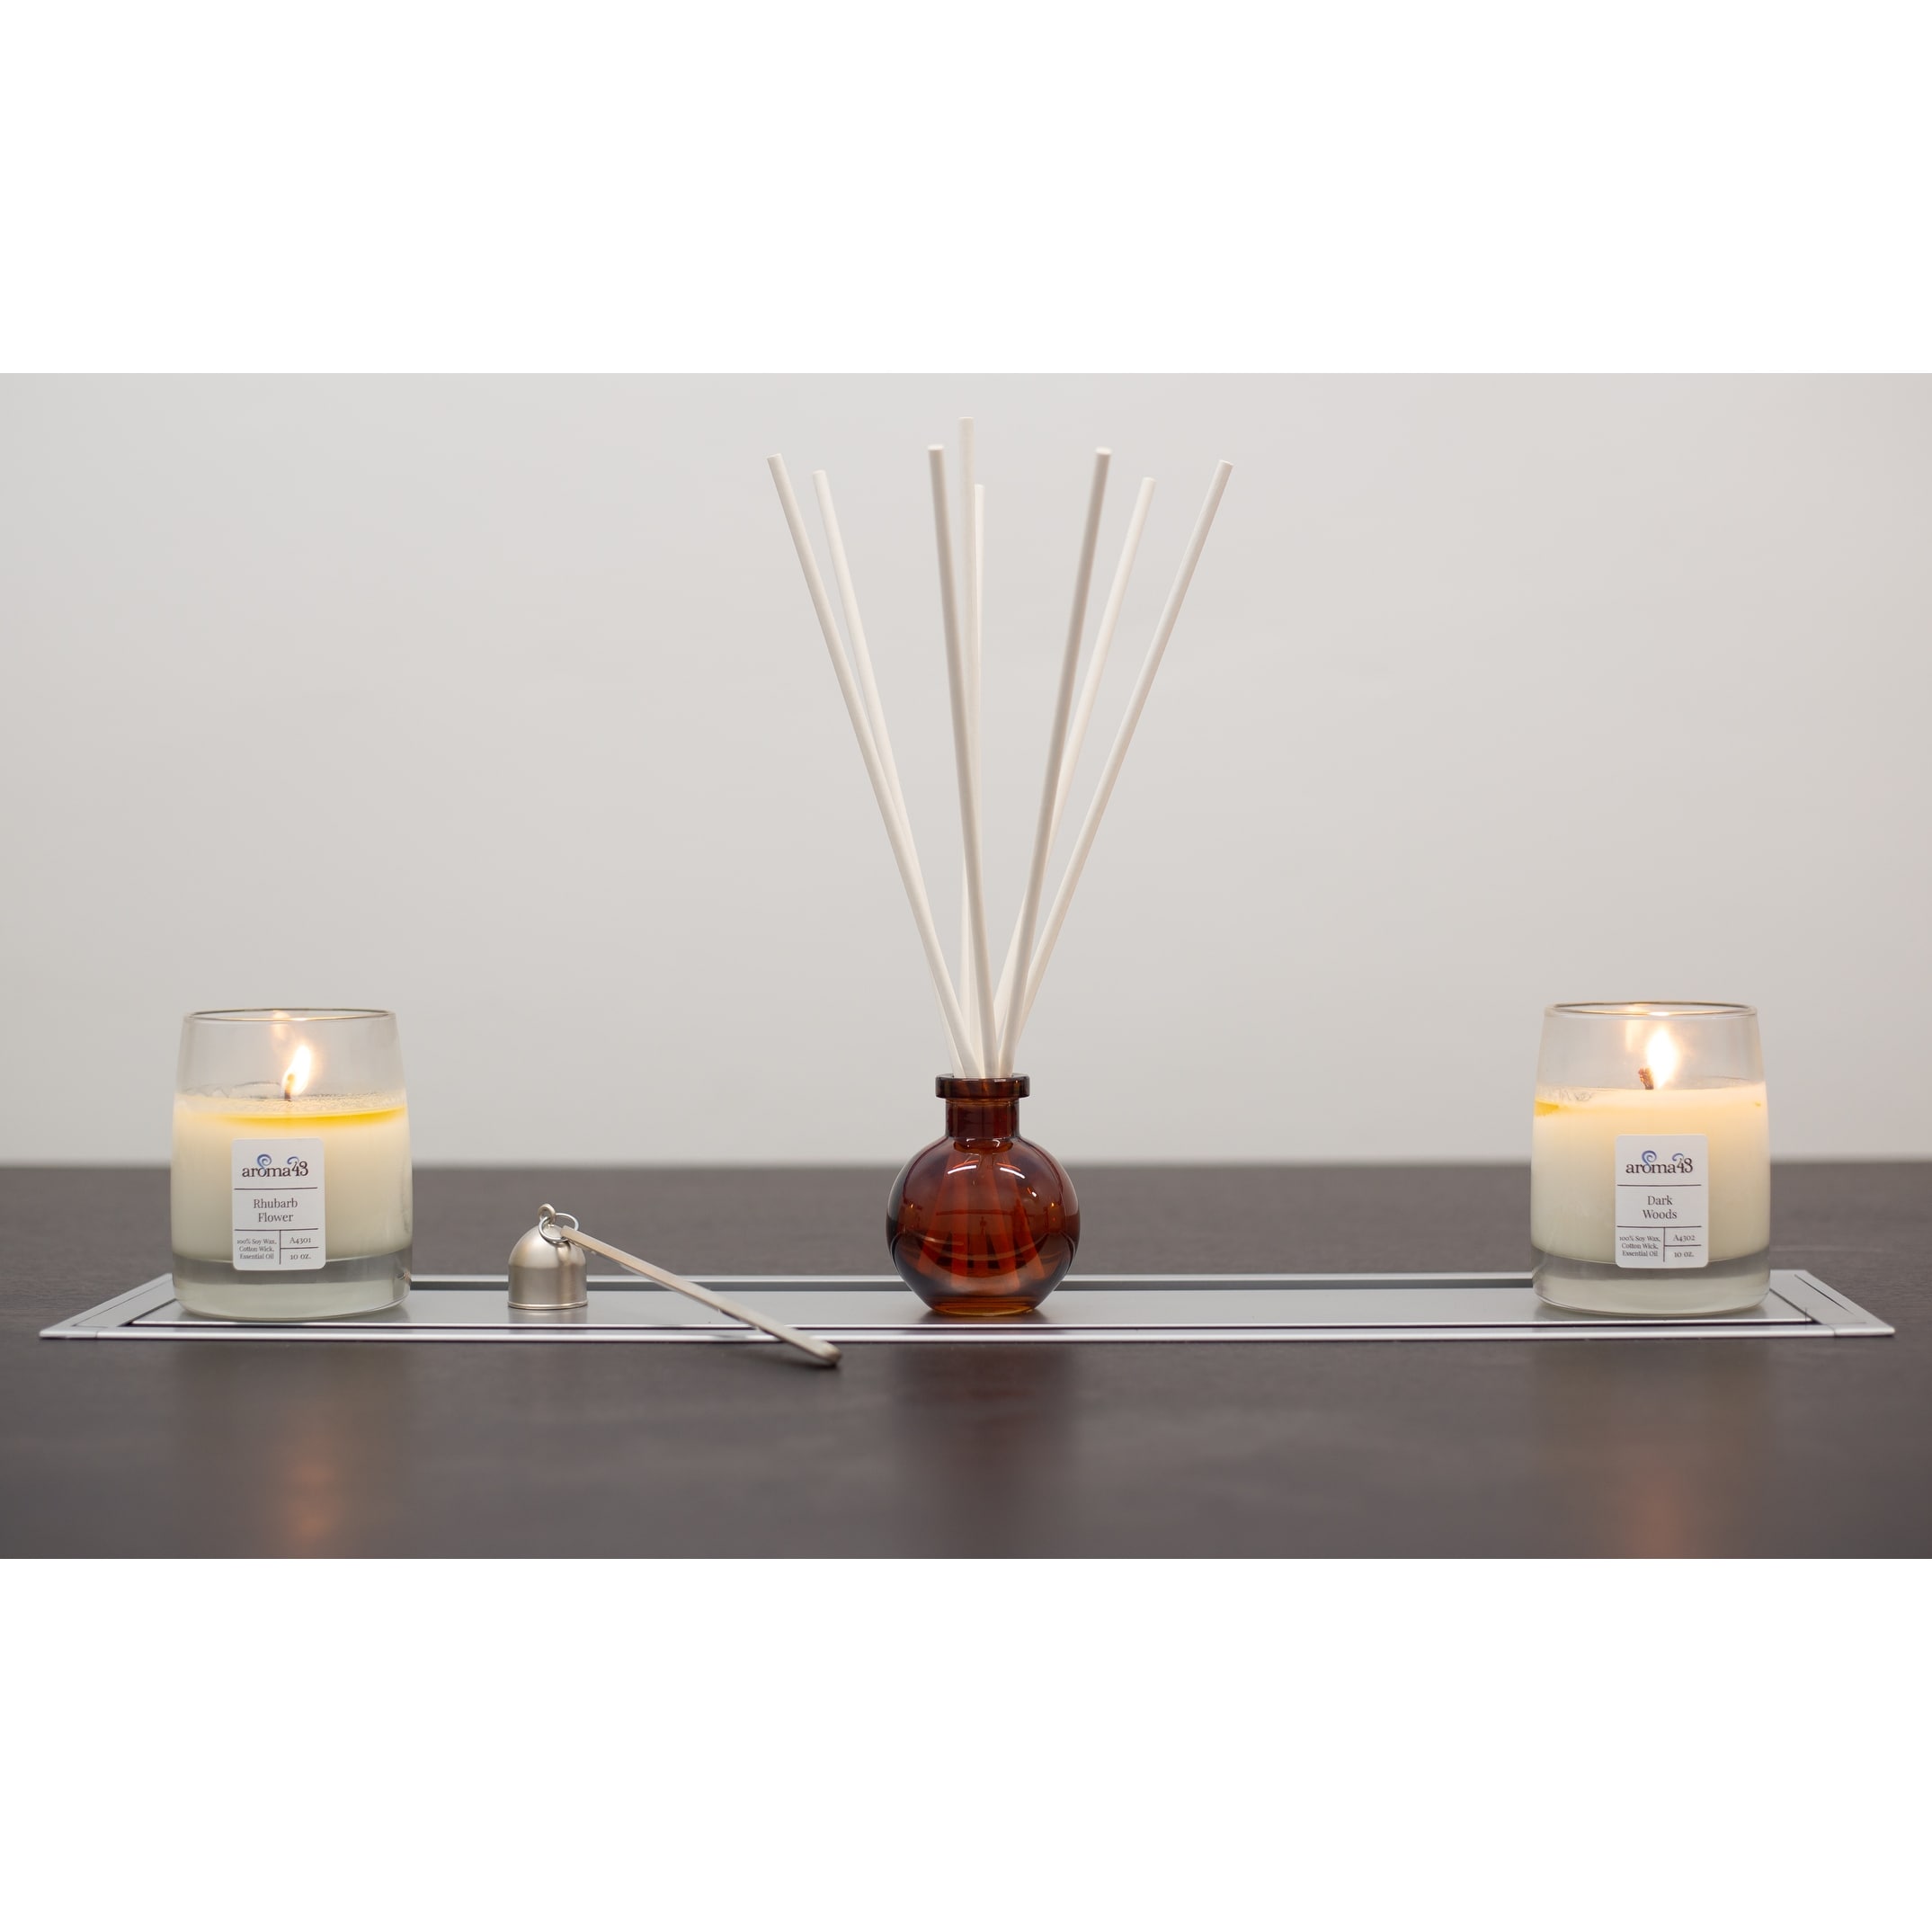 Dark Woods Large 3 Wick Candle – aroma43